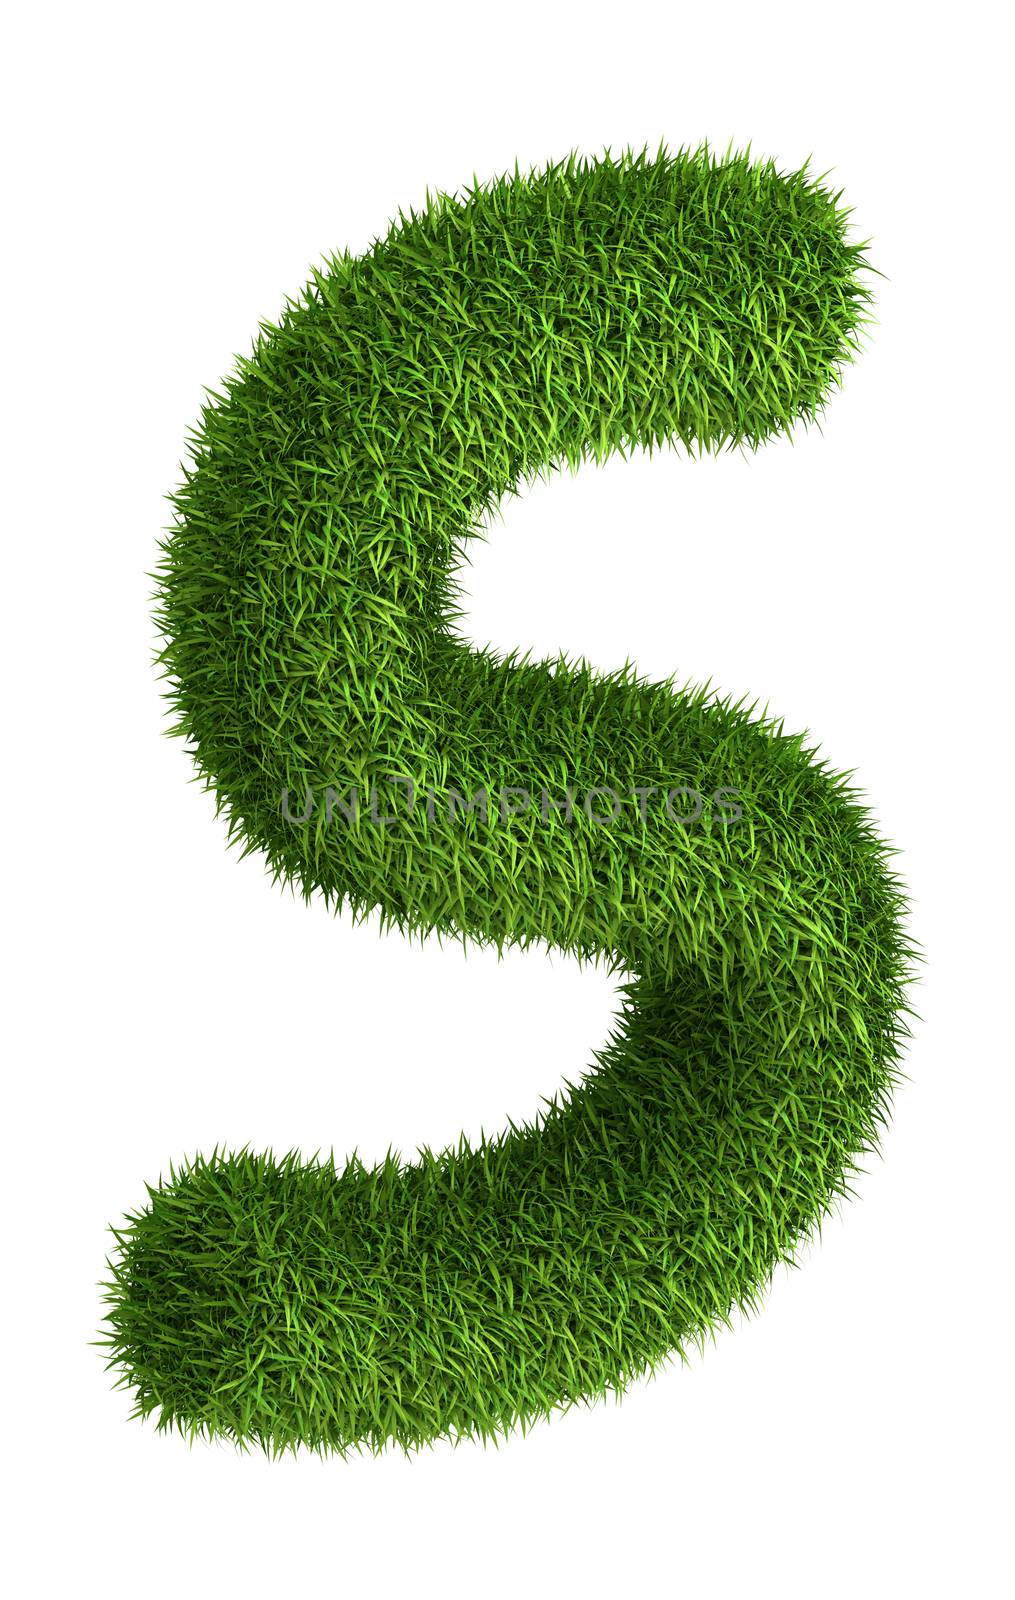 Natural grass letter S by iunewind